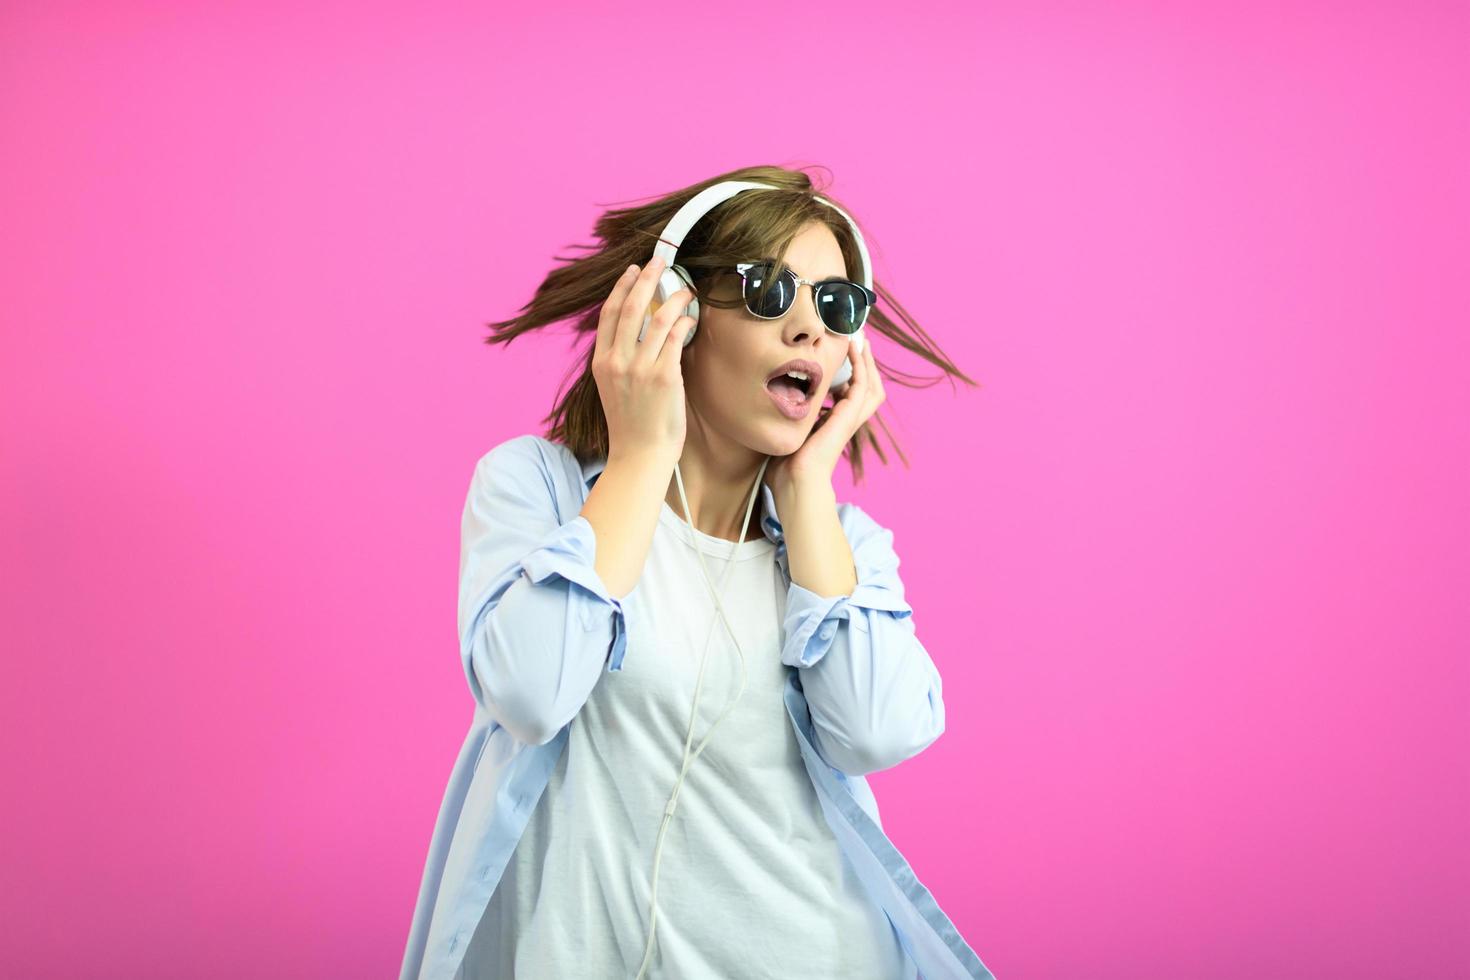 brunette lady in black glasses dancing and   listening music isolate on pink background photo